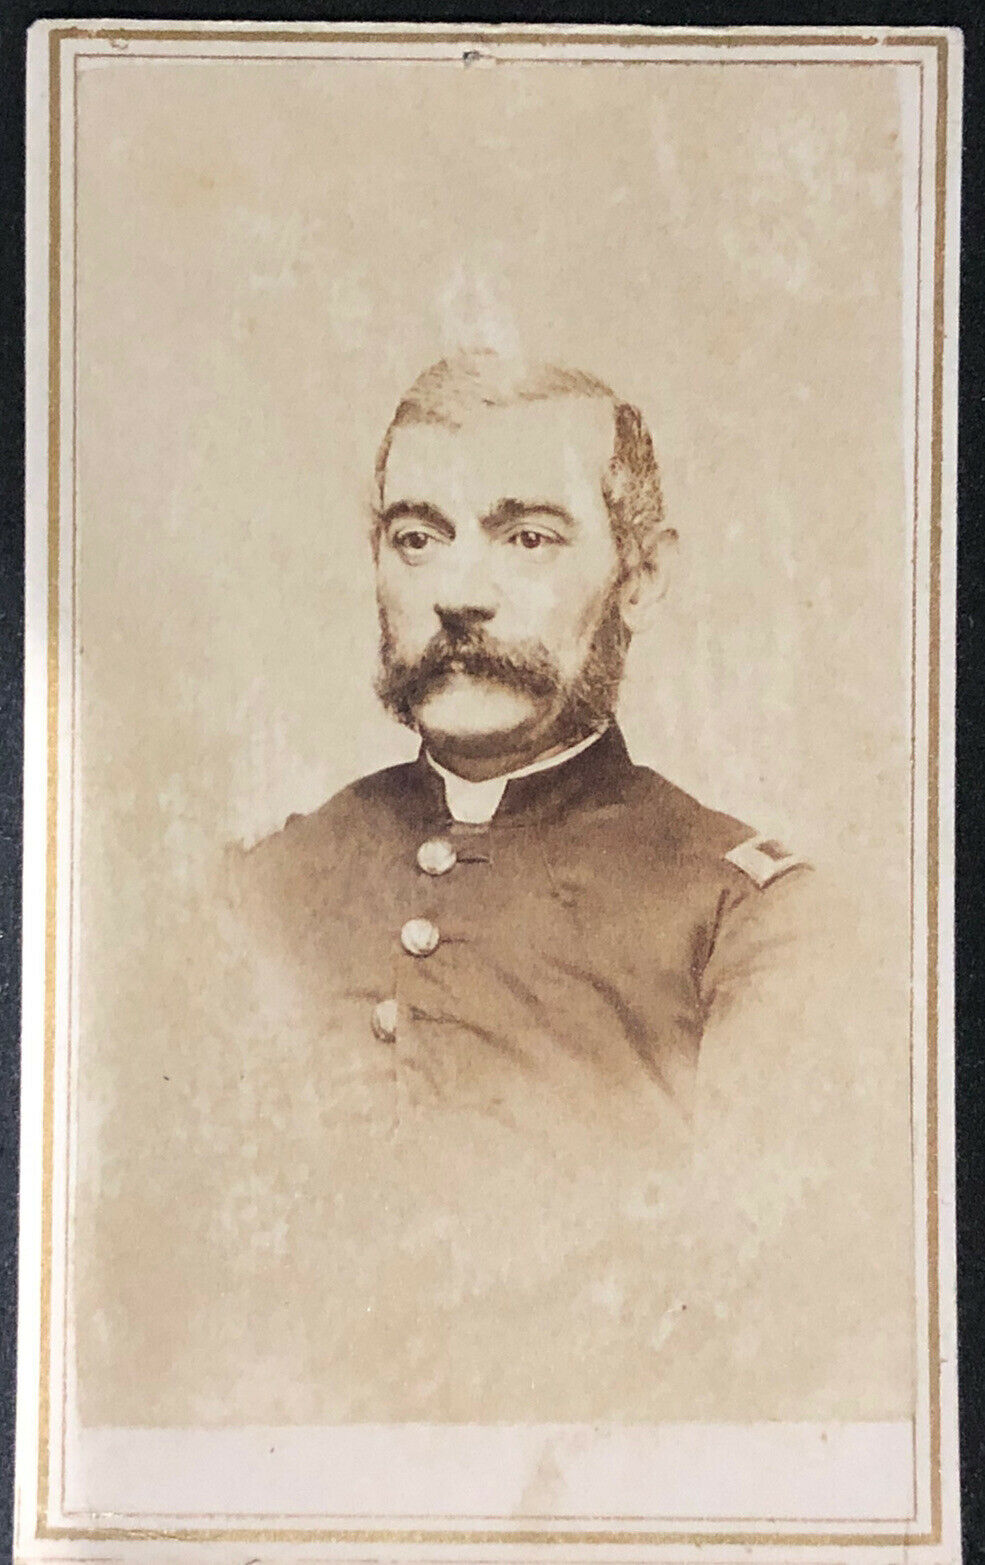 Tax Stamped Cdv Of Unidentified Union Officer By Bowdoin, Taylor & Co Alex, Va